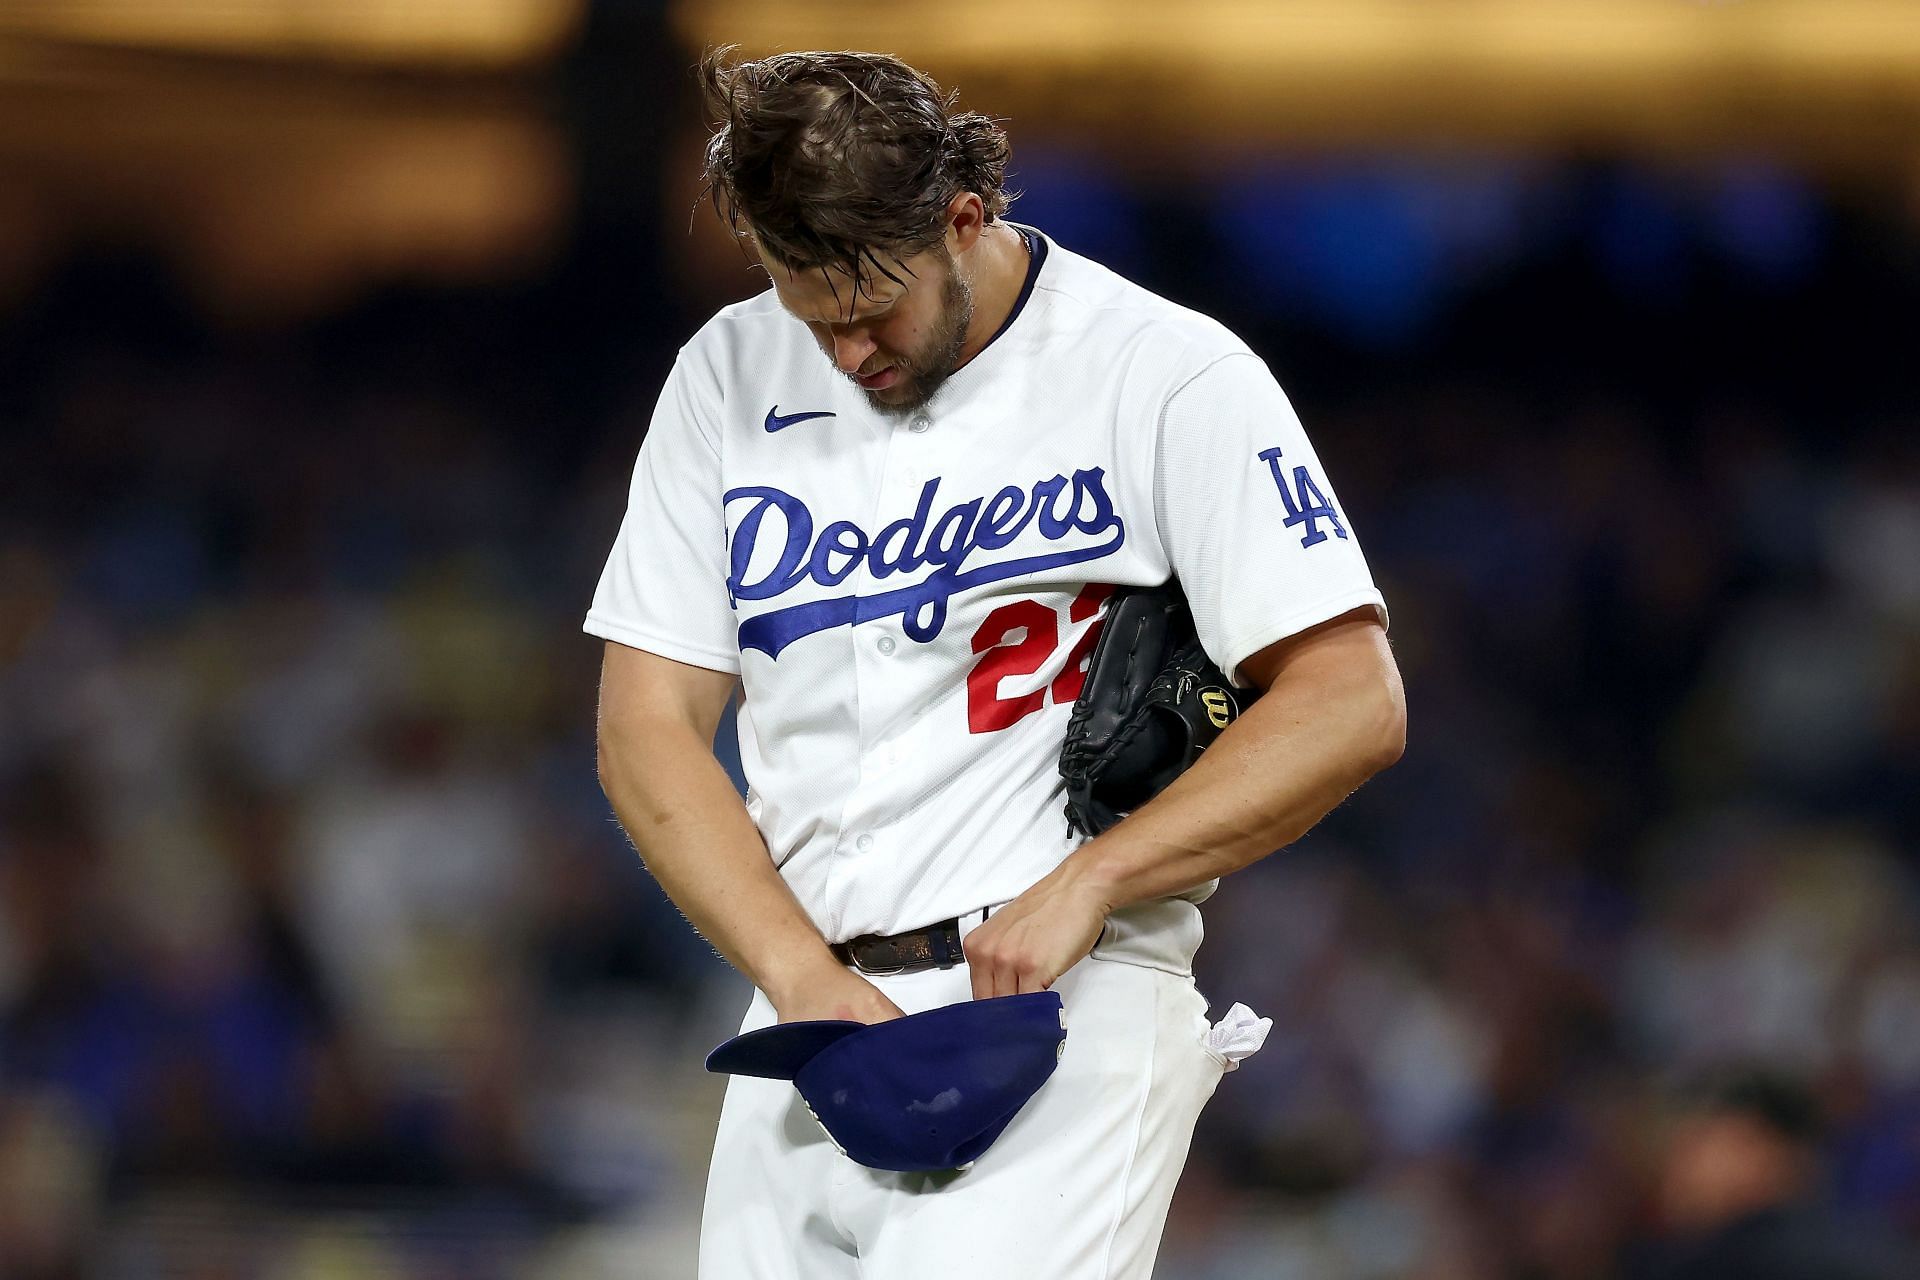 Dodgers past and present share memories and condolences after